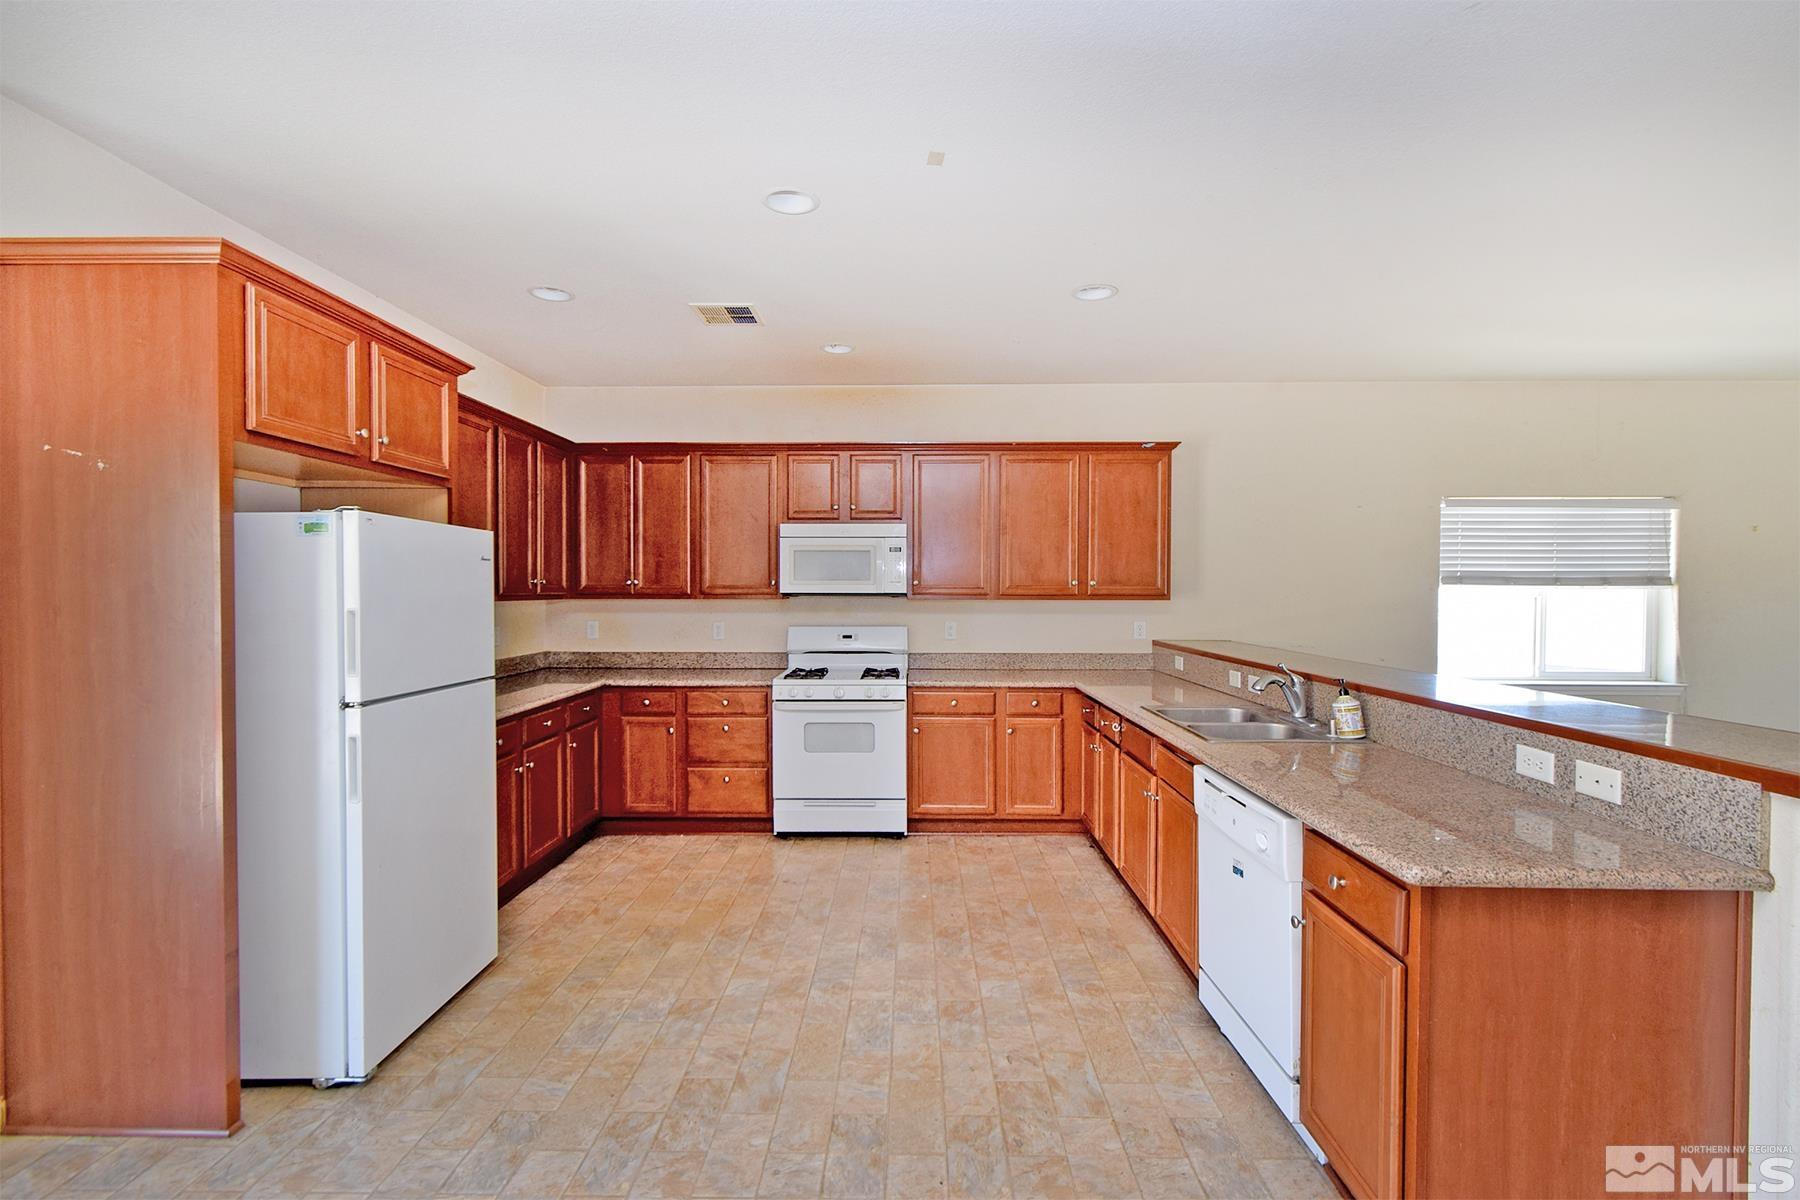 a kitchen with stainless steel appliances granite countertop a refrigerator a sink a stove with wooden cabinets